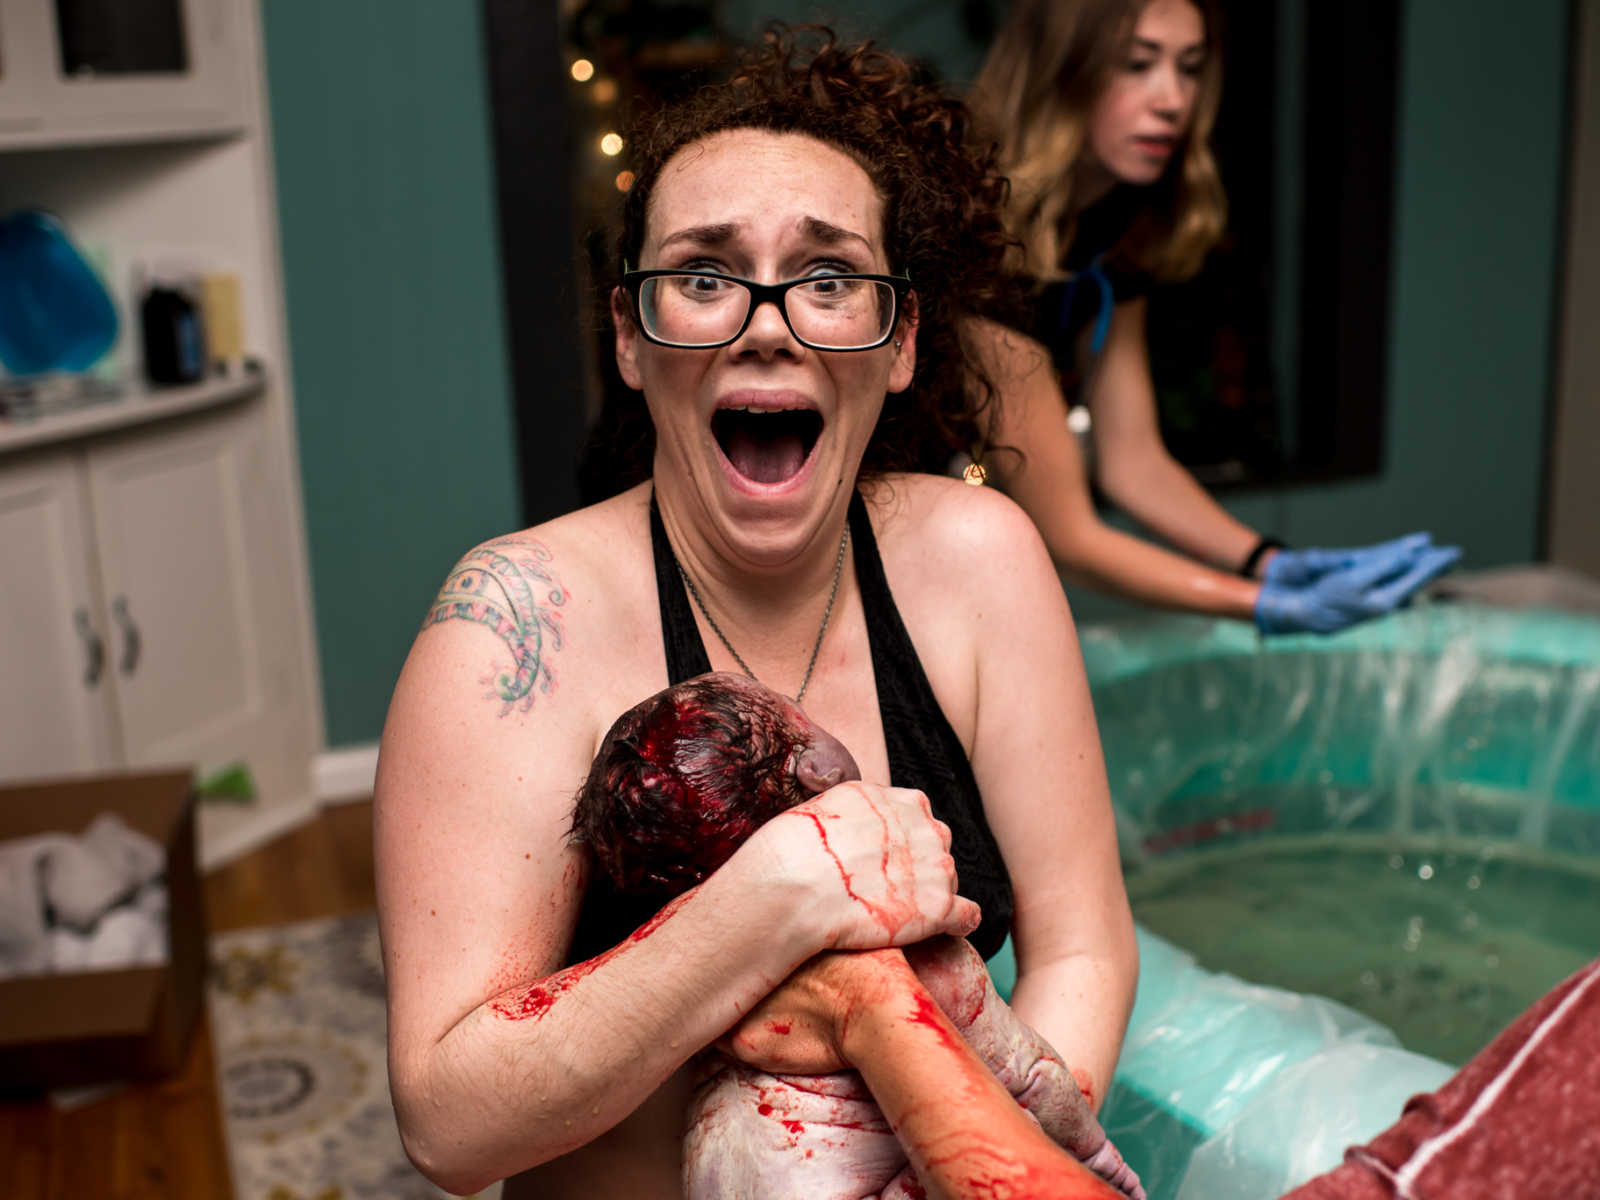 Woman holds bloody 11 pound newborn out side of birthing pool in look of shock